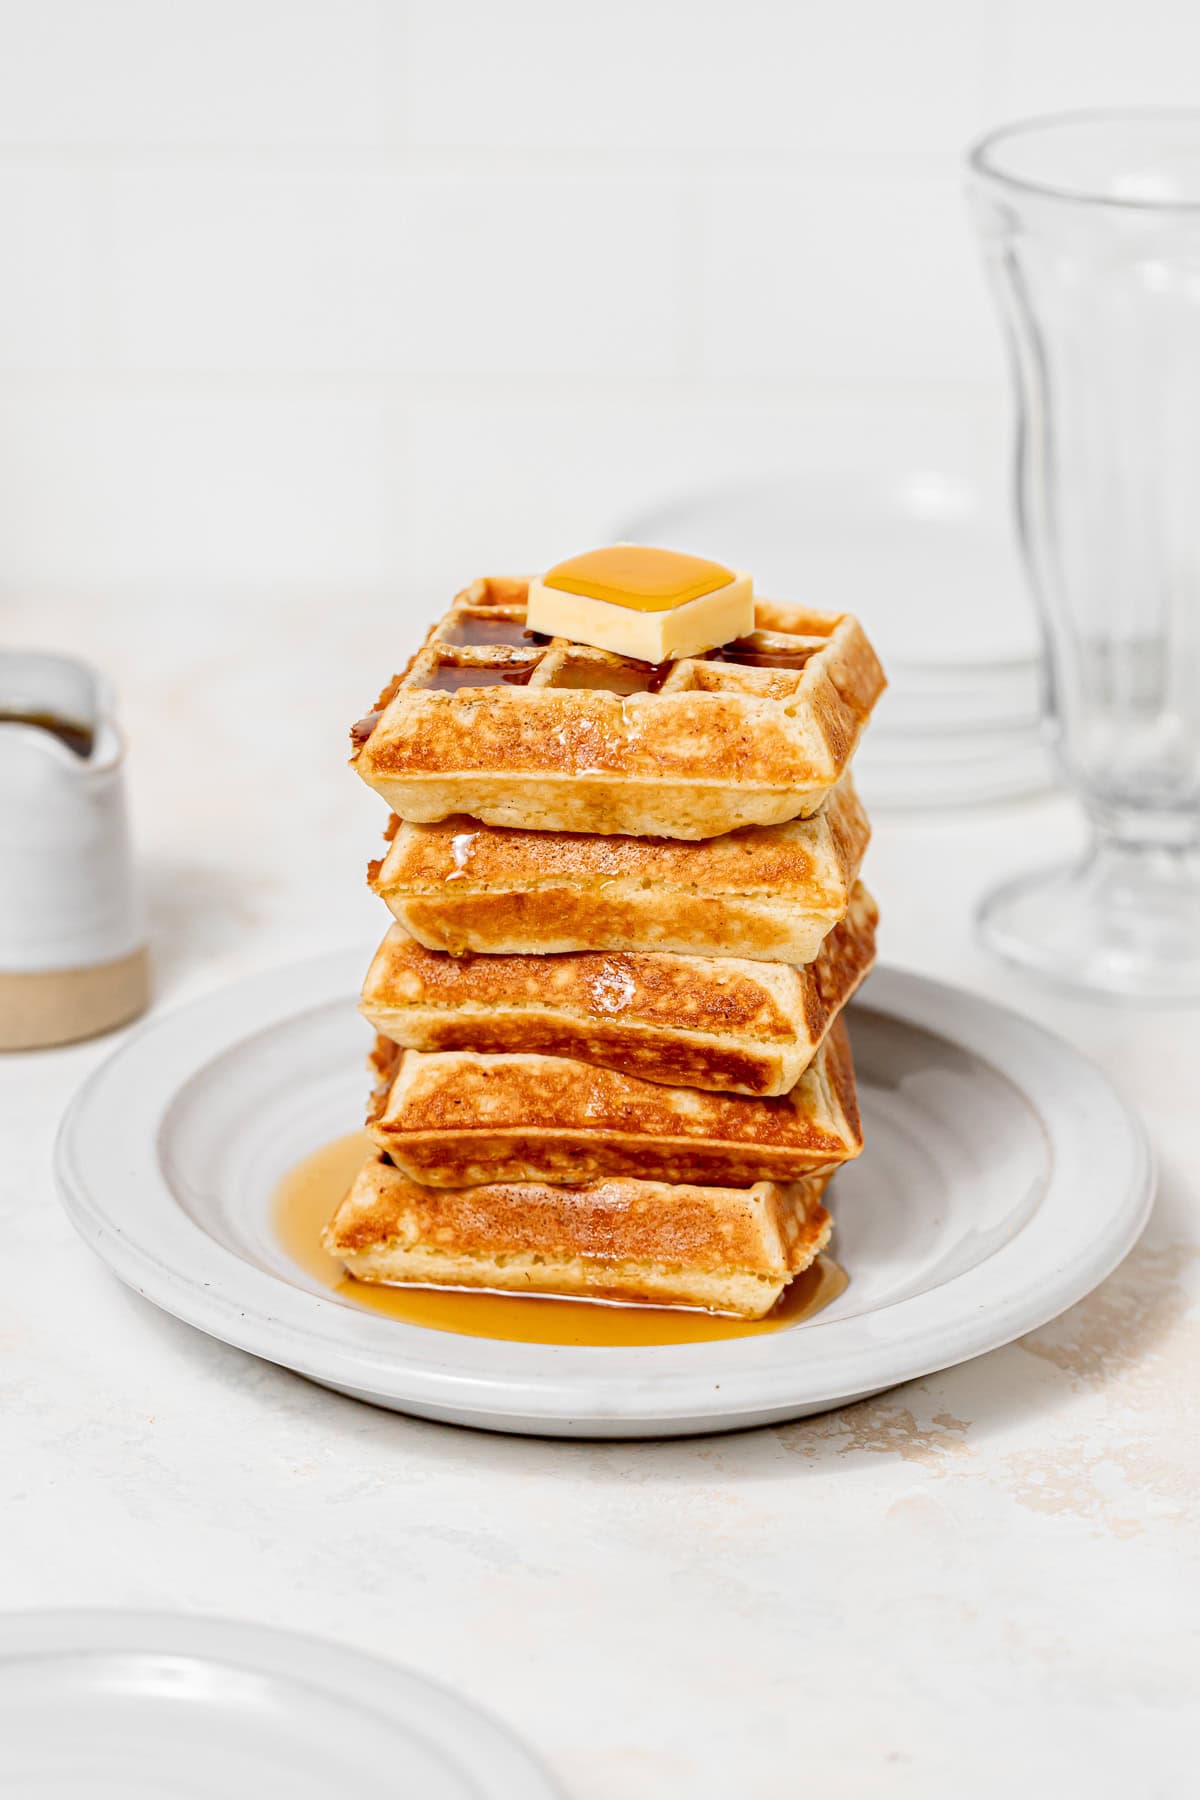 yeasted belgian waffles stacked with maple syrup and butter on top.